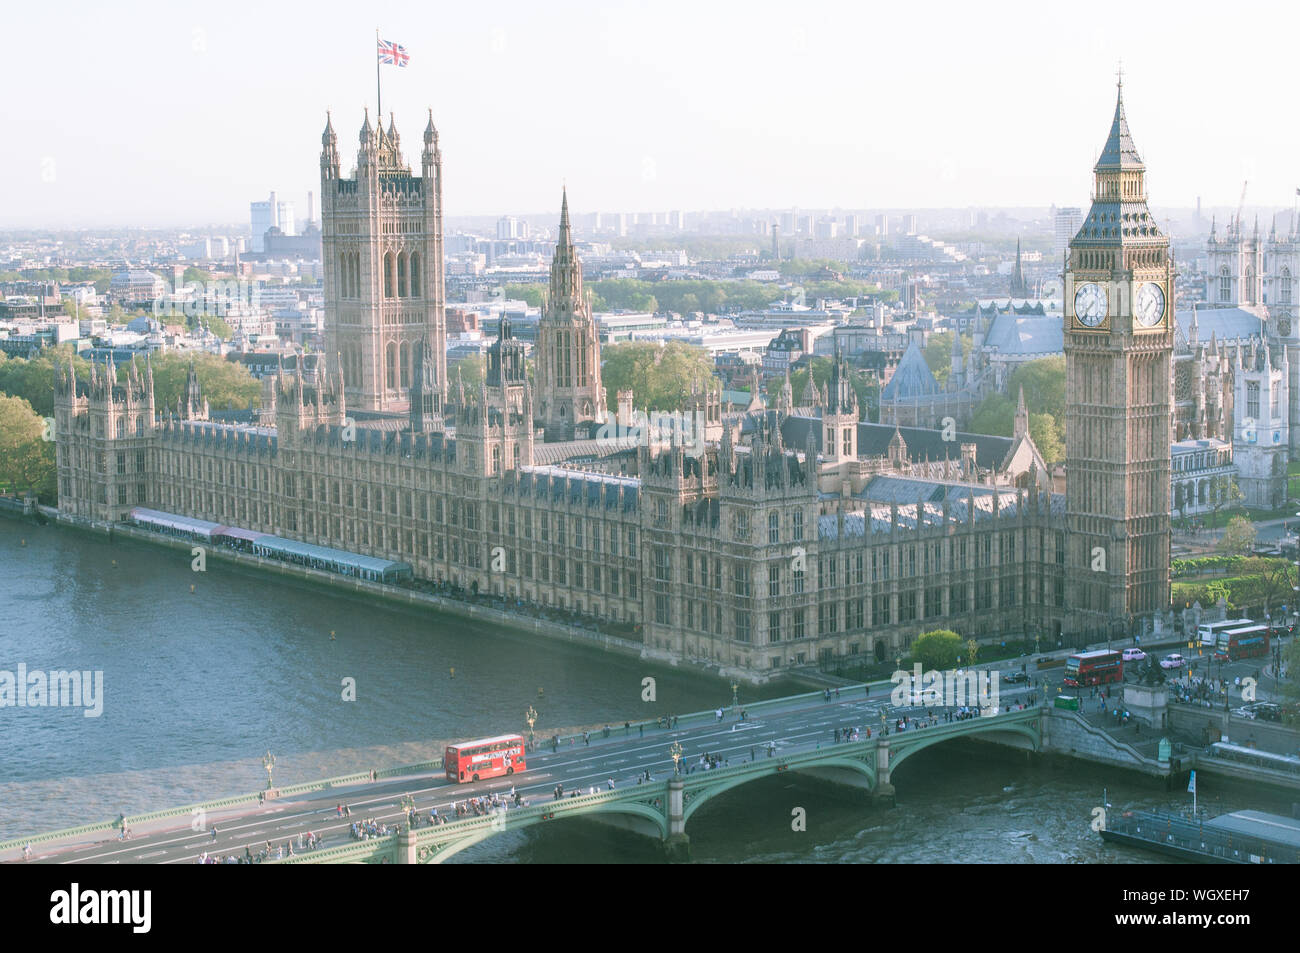 Aerial View Of Westminster Palace And Bridge With Thames River In City Stock Photo